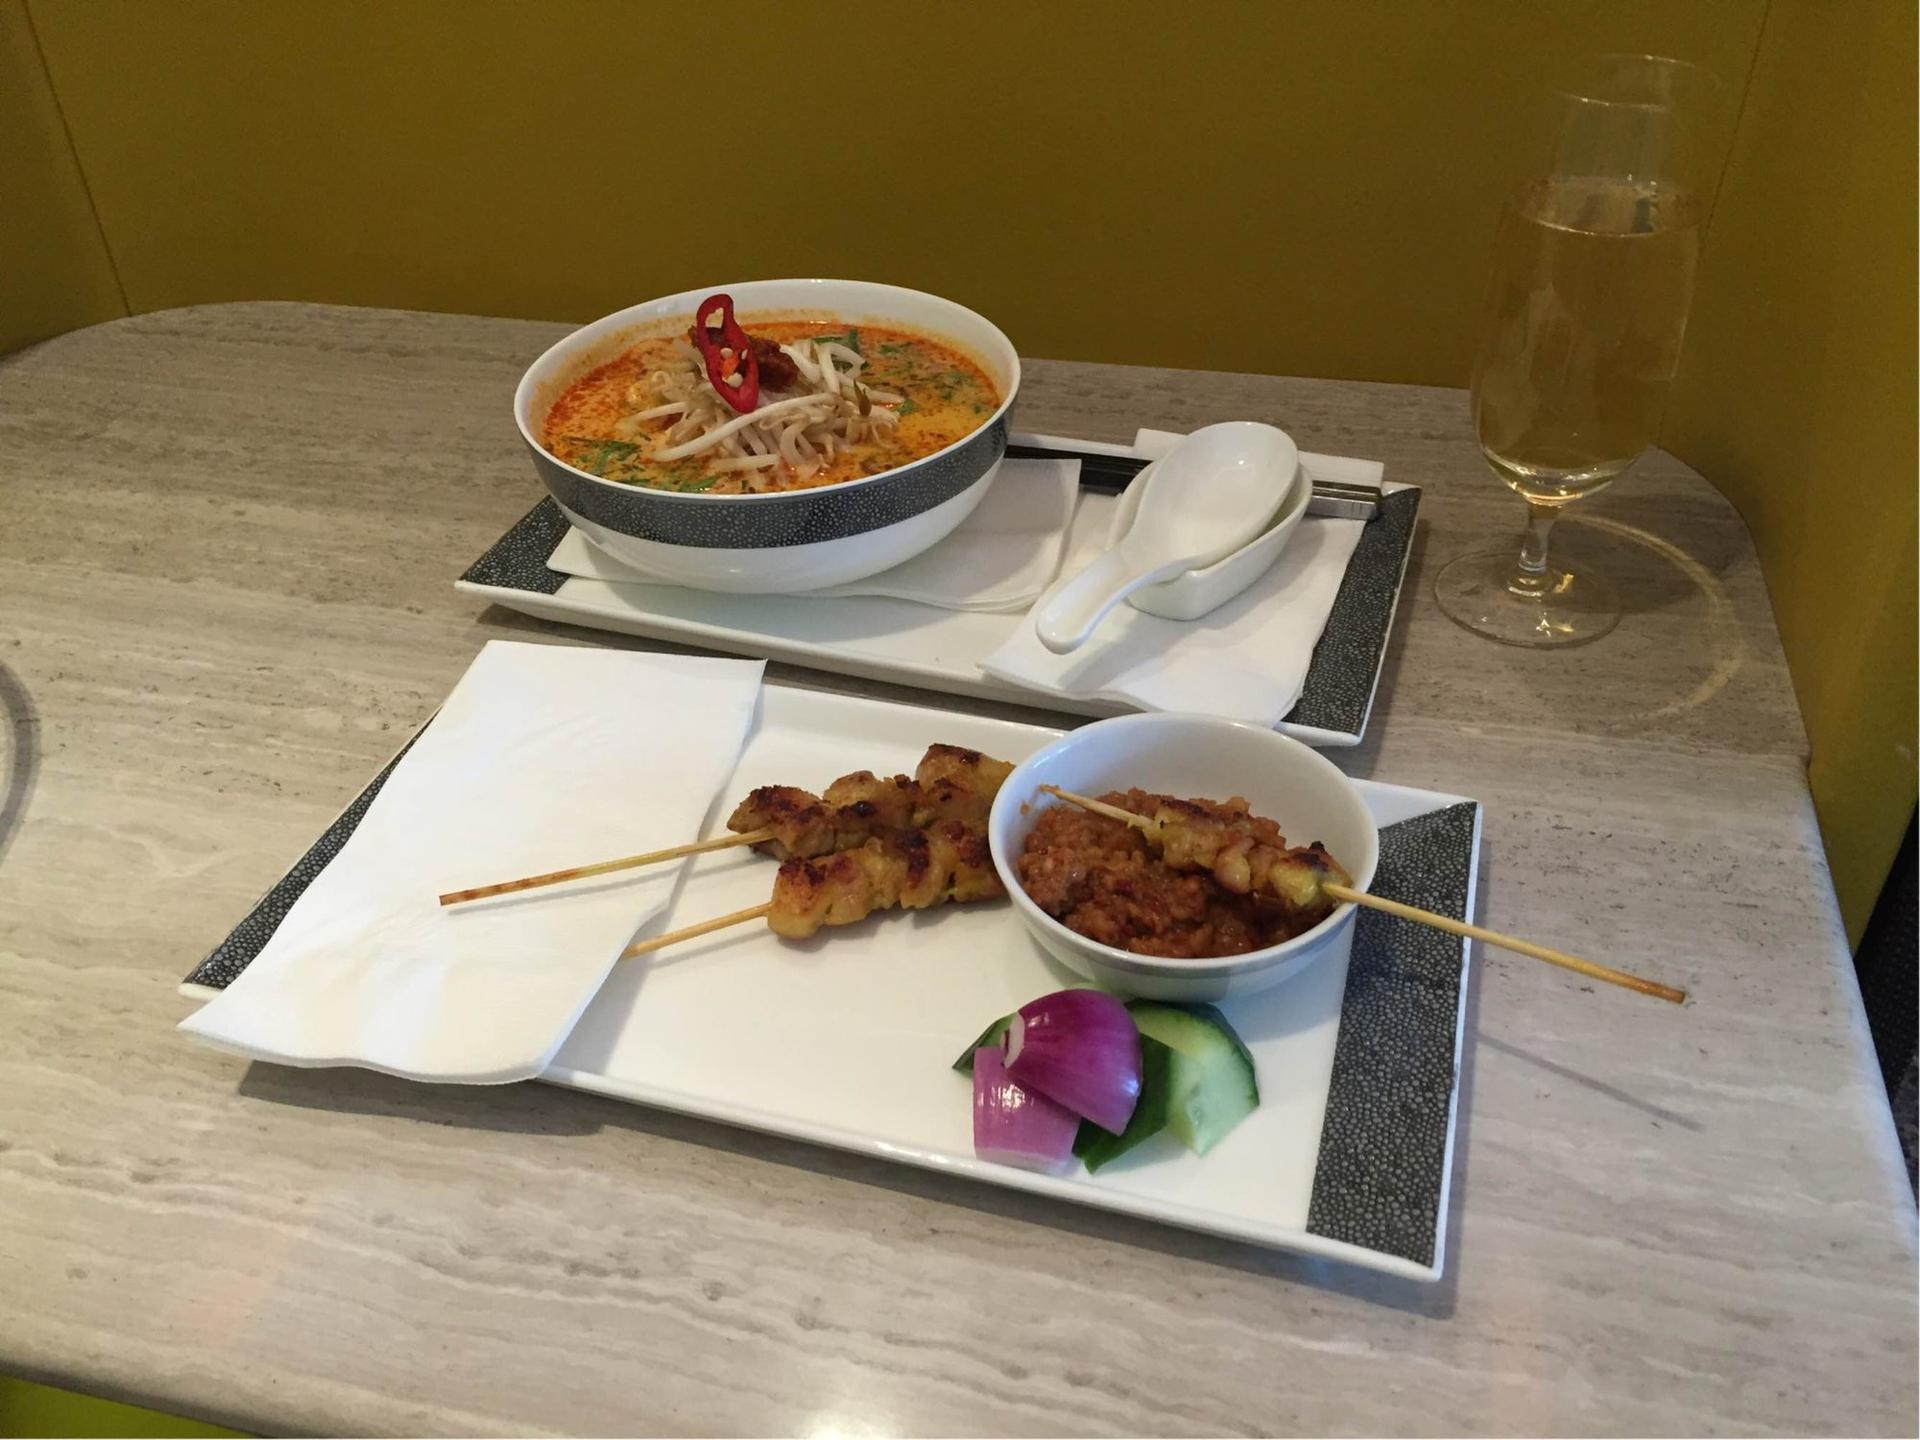 Singapore Airlines SilverKris First Class Lounge image 9 of 17